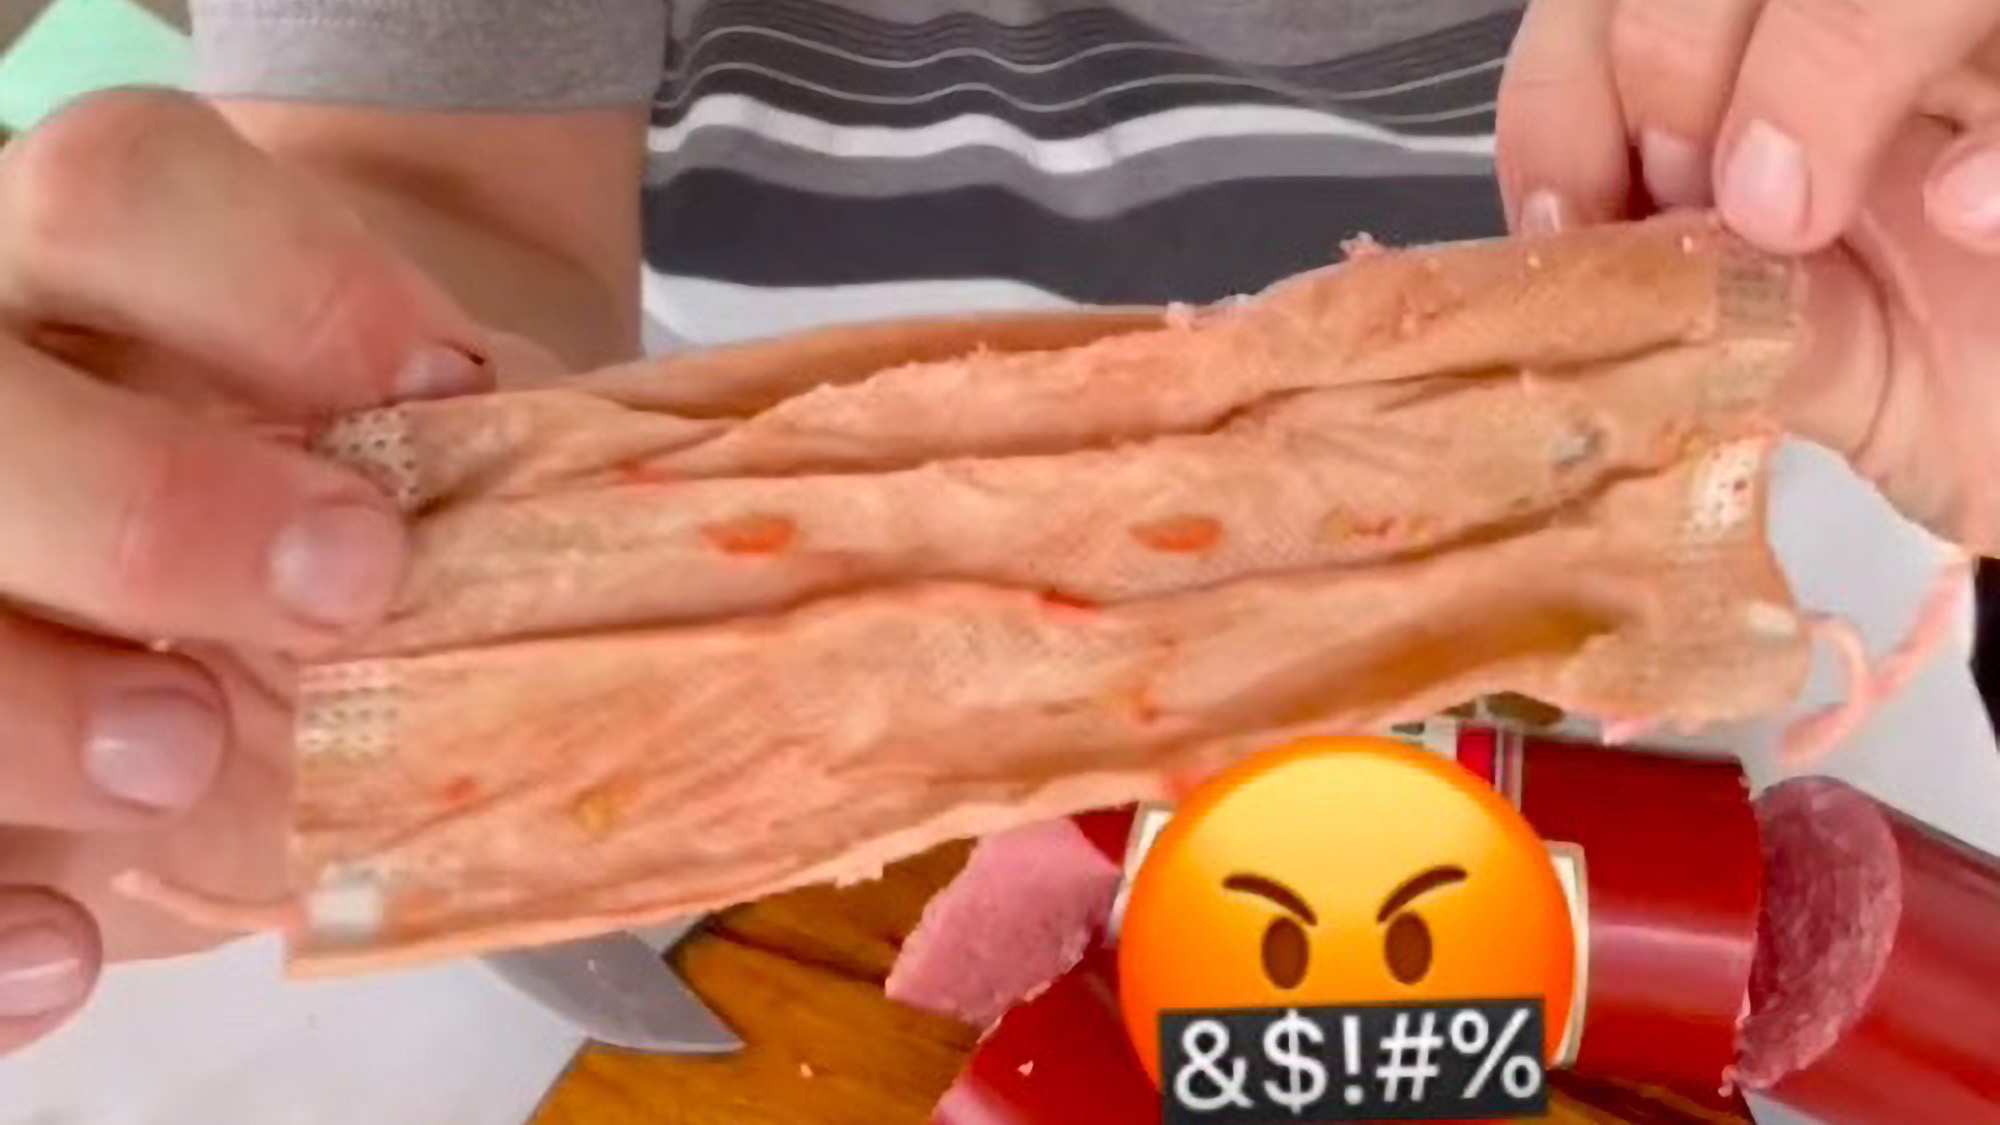 Read more about the article Viral Moment Russian Influencer Finds Face Mask Inside Sausage